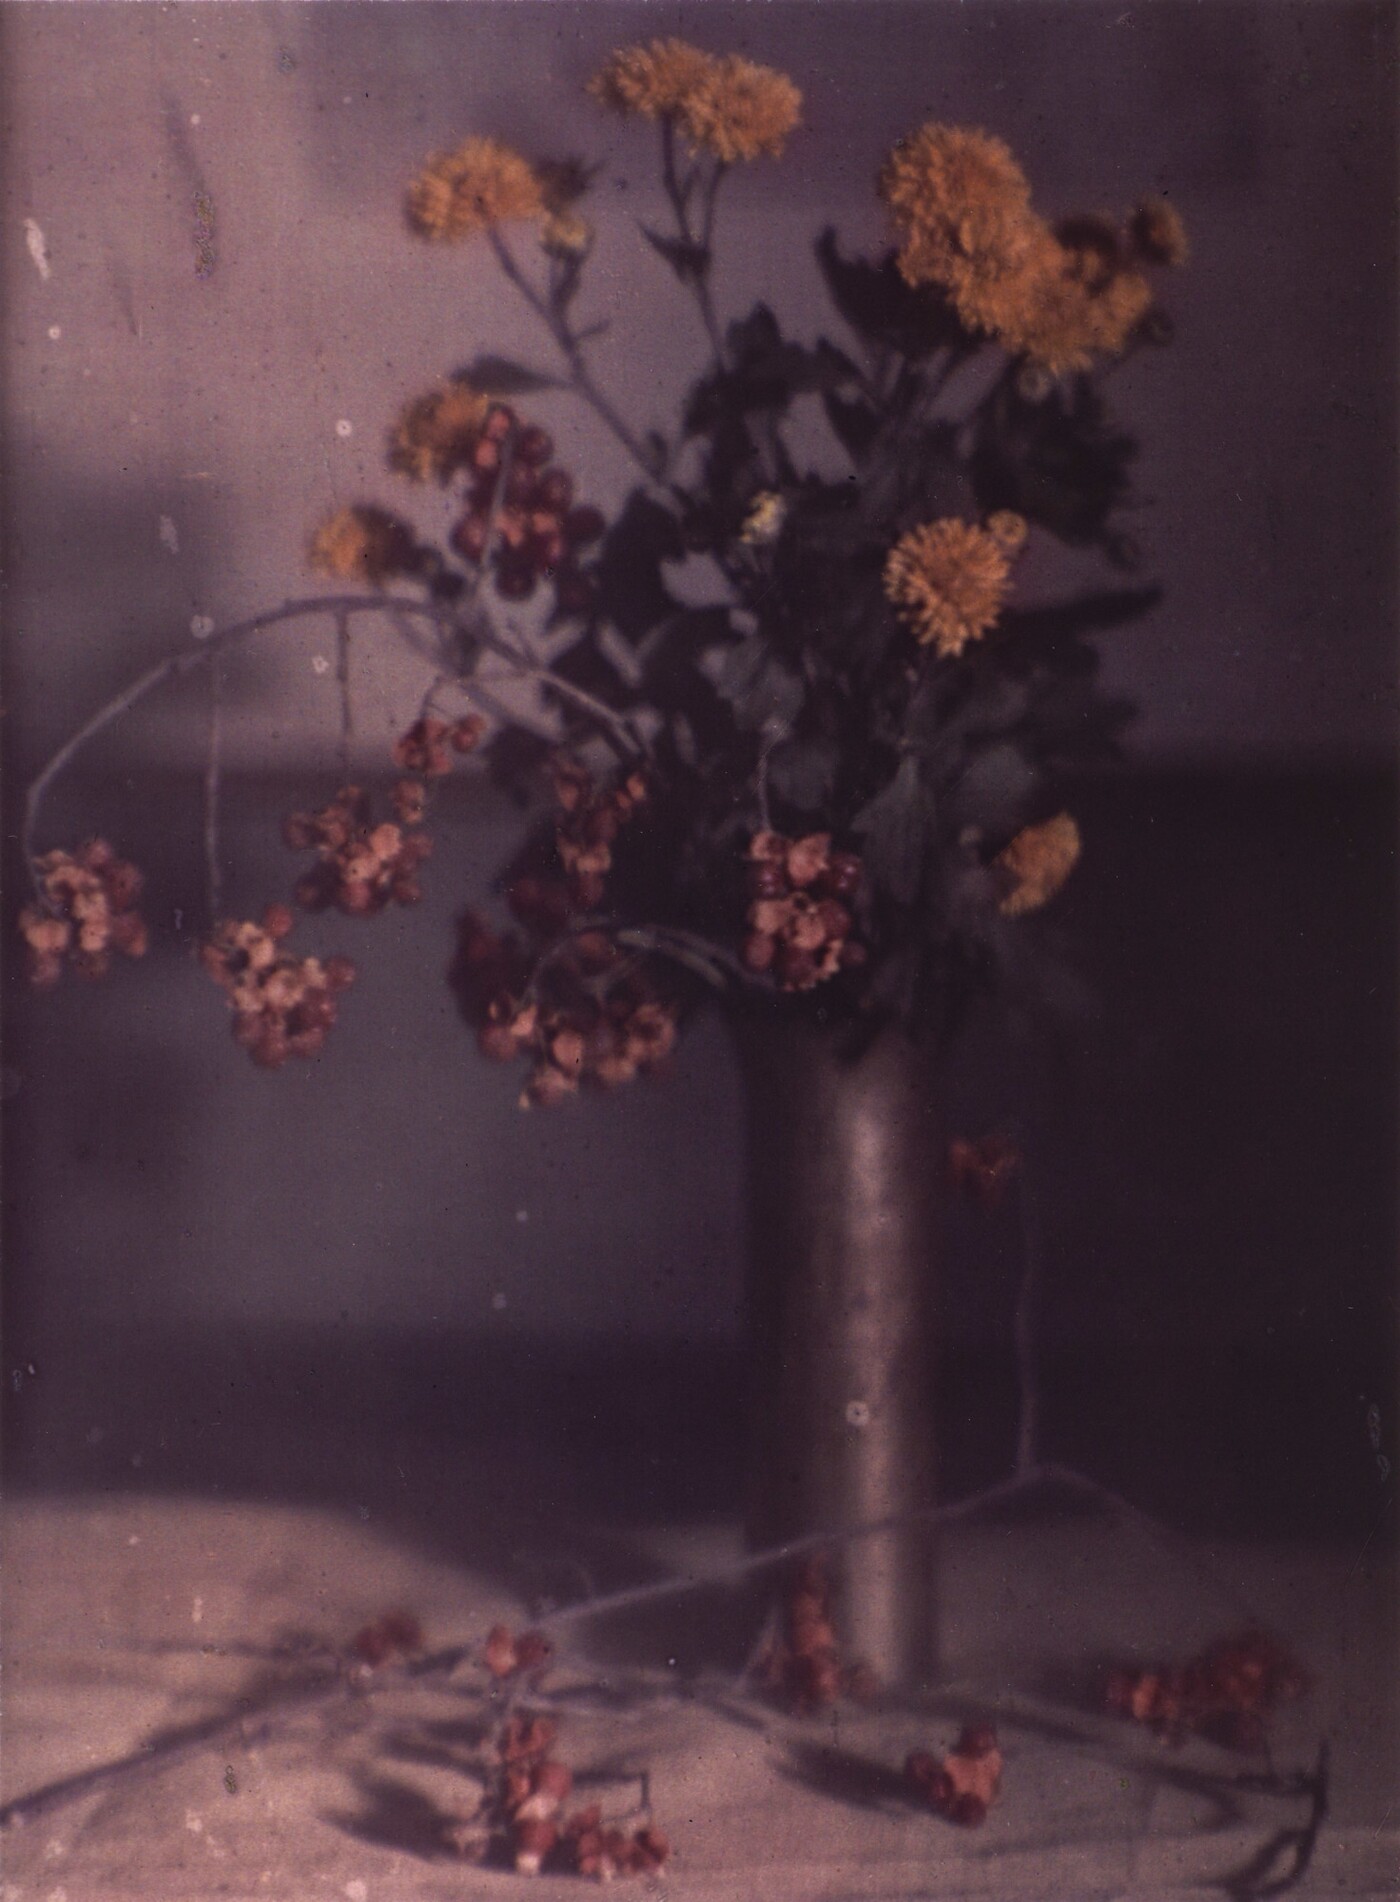 Karl Struss :: Still Life with Pewter Vase, New York, ca. 1910. Dye imbibition print from the original Autochrome, printed ca. 1981. | src Amon Carter Museum